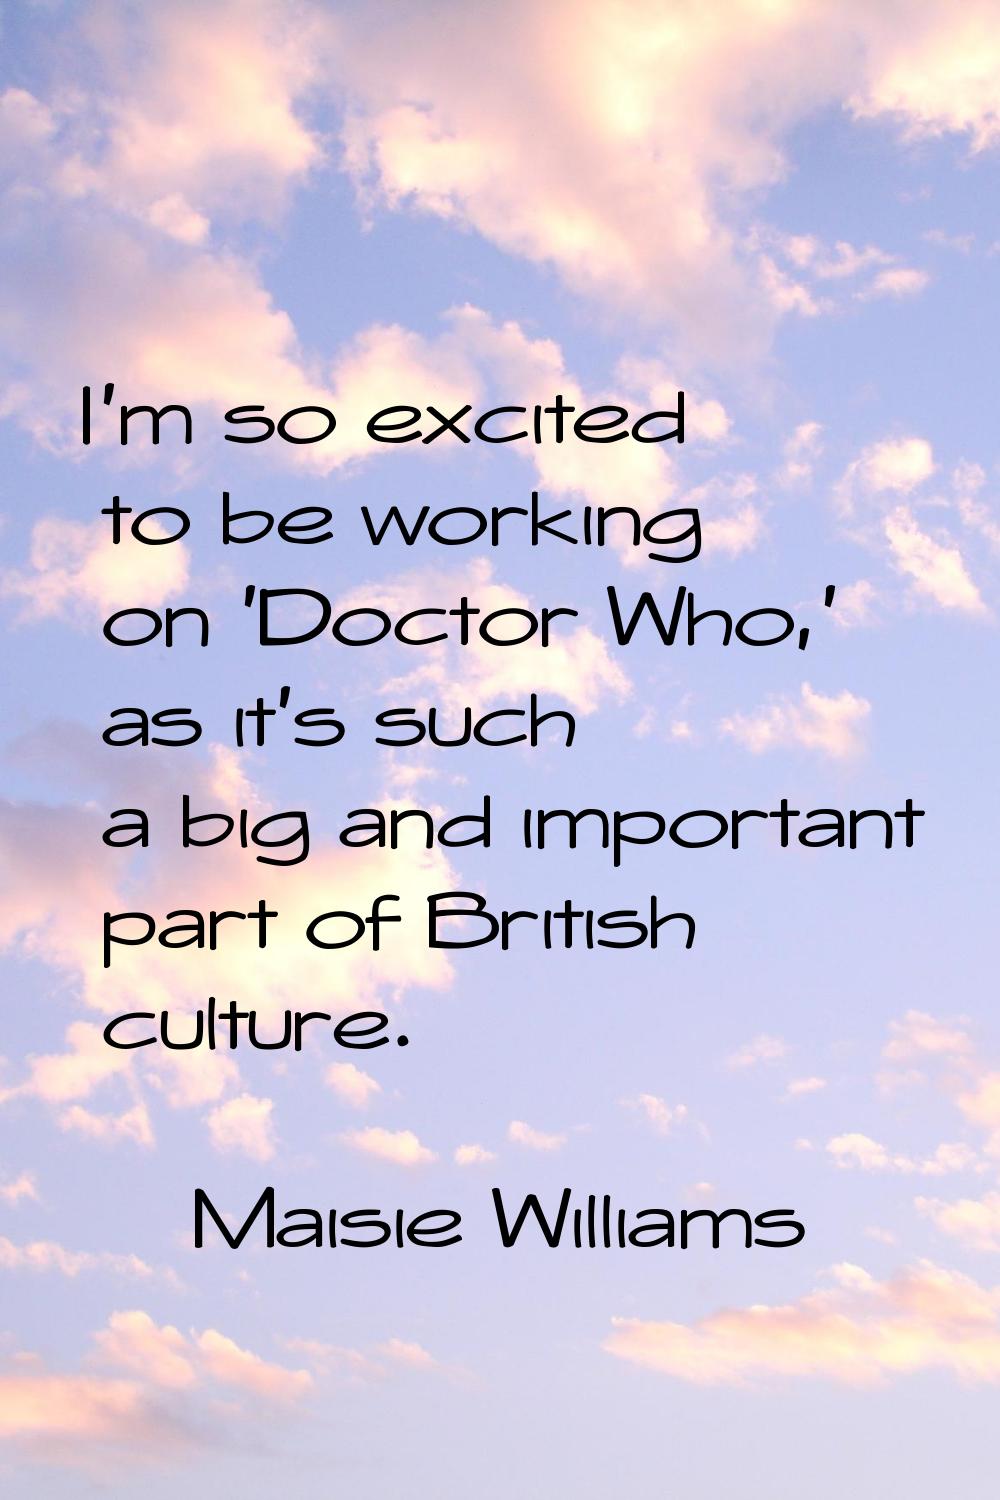 I'm so excited to be working on 'Doctor Who,' as it's such a big and important part of British cult